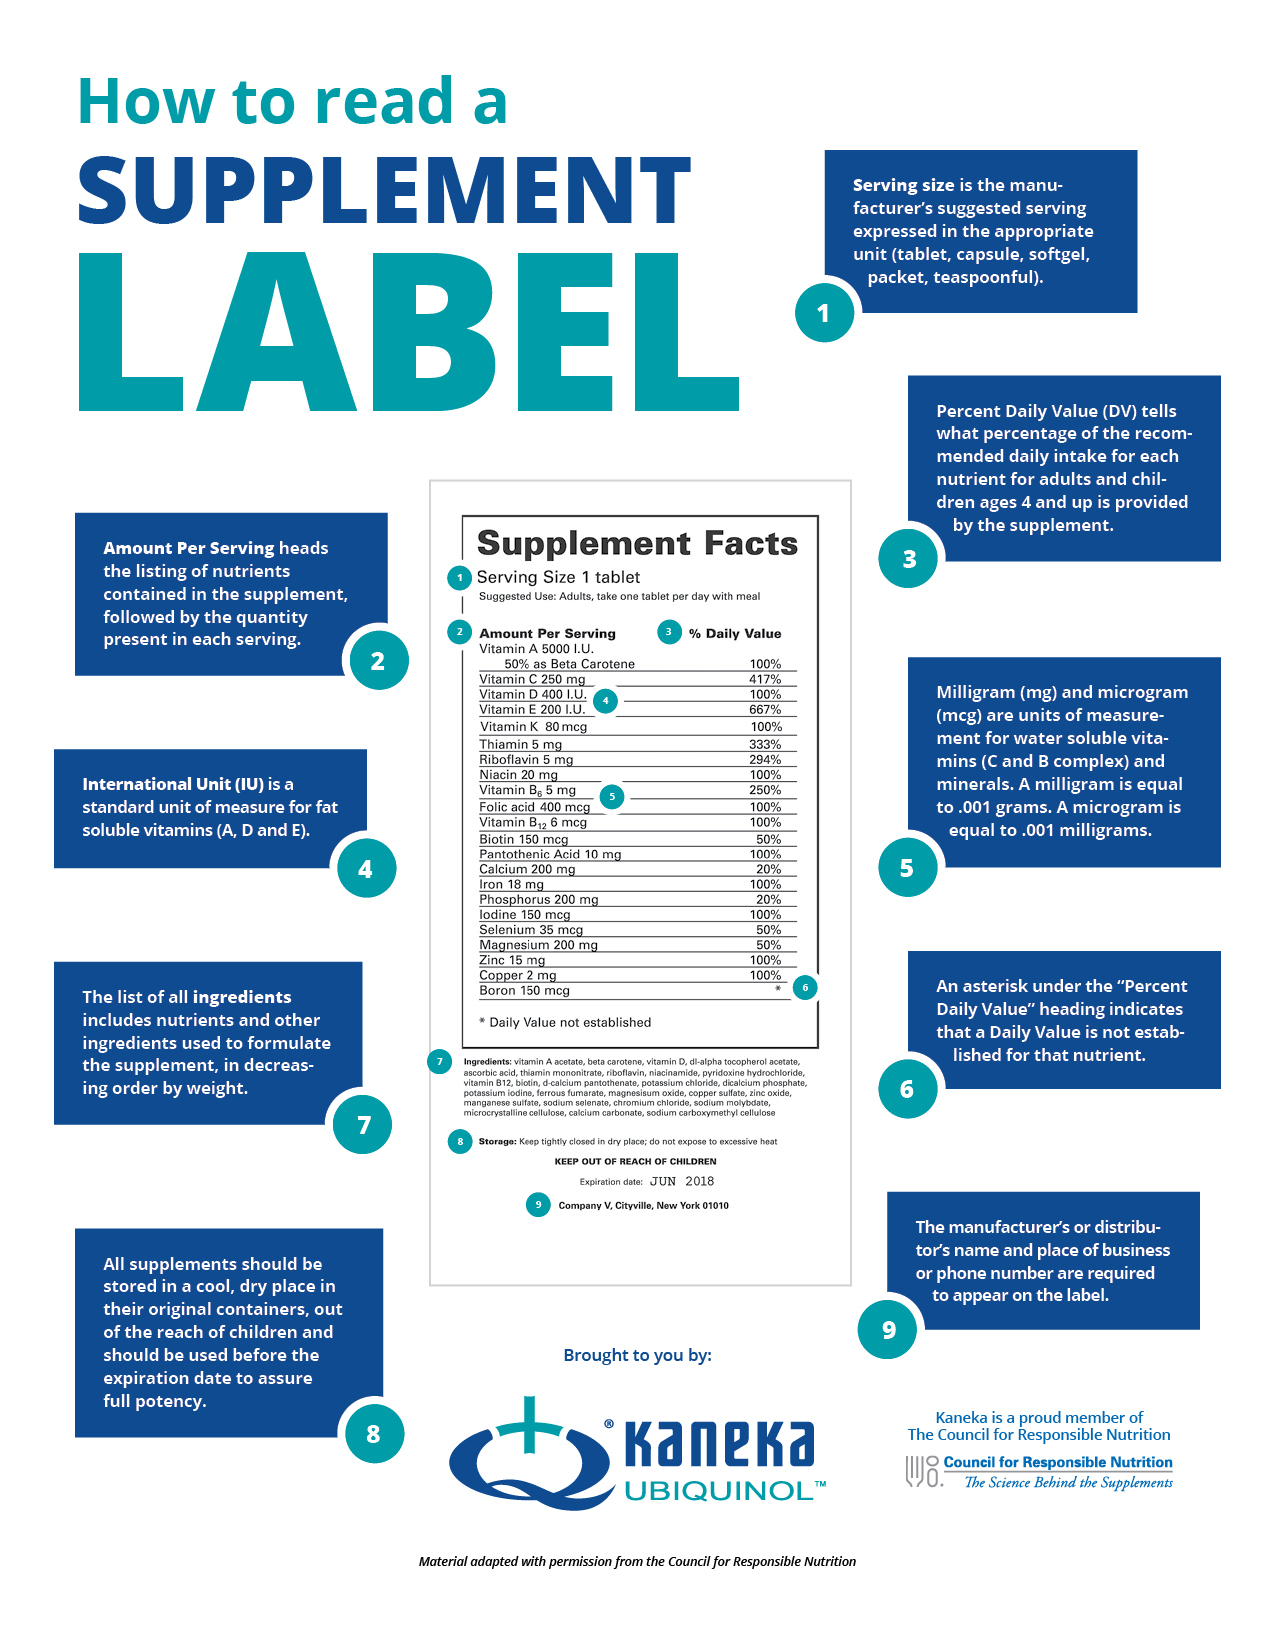 How to Read a Supplement Label | Ubiquinol.org